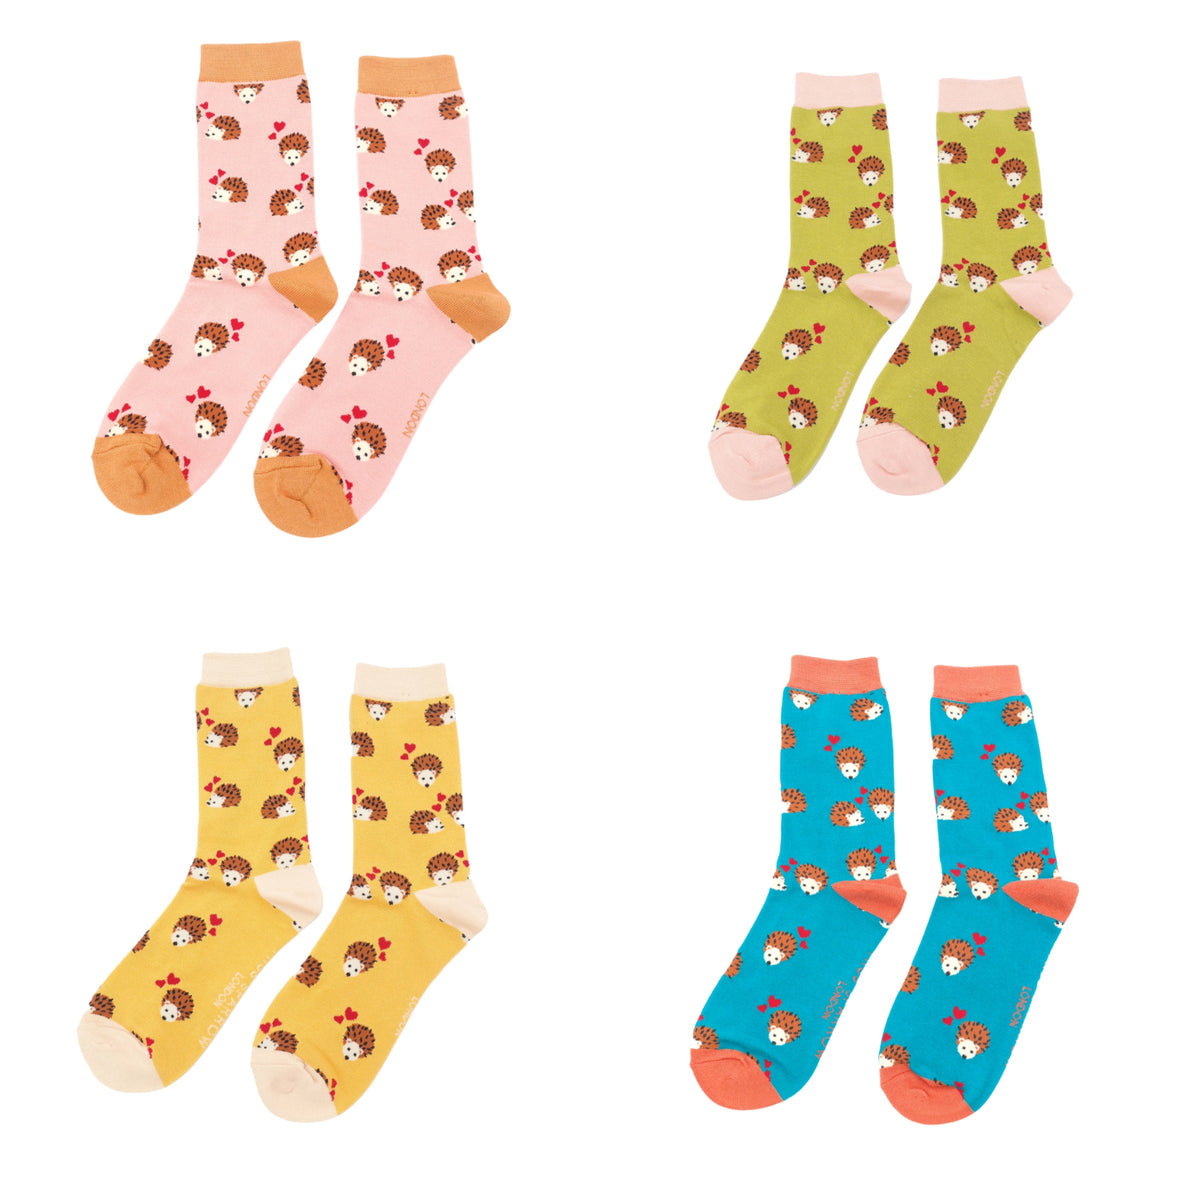 Miss Sparrow Bamboo Socks for Women - Hearts and Hedgehogs Composite